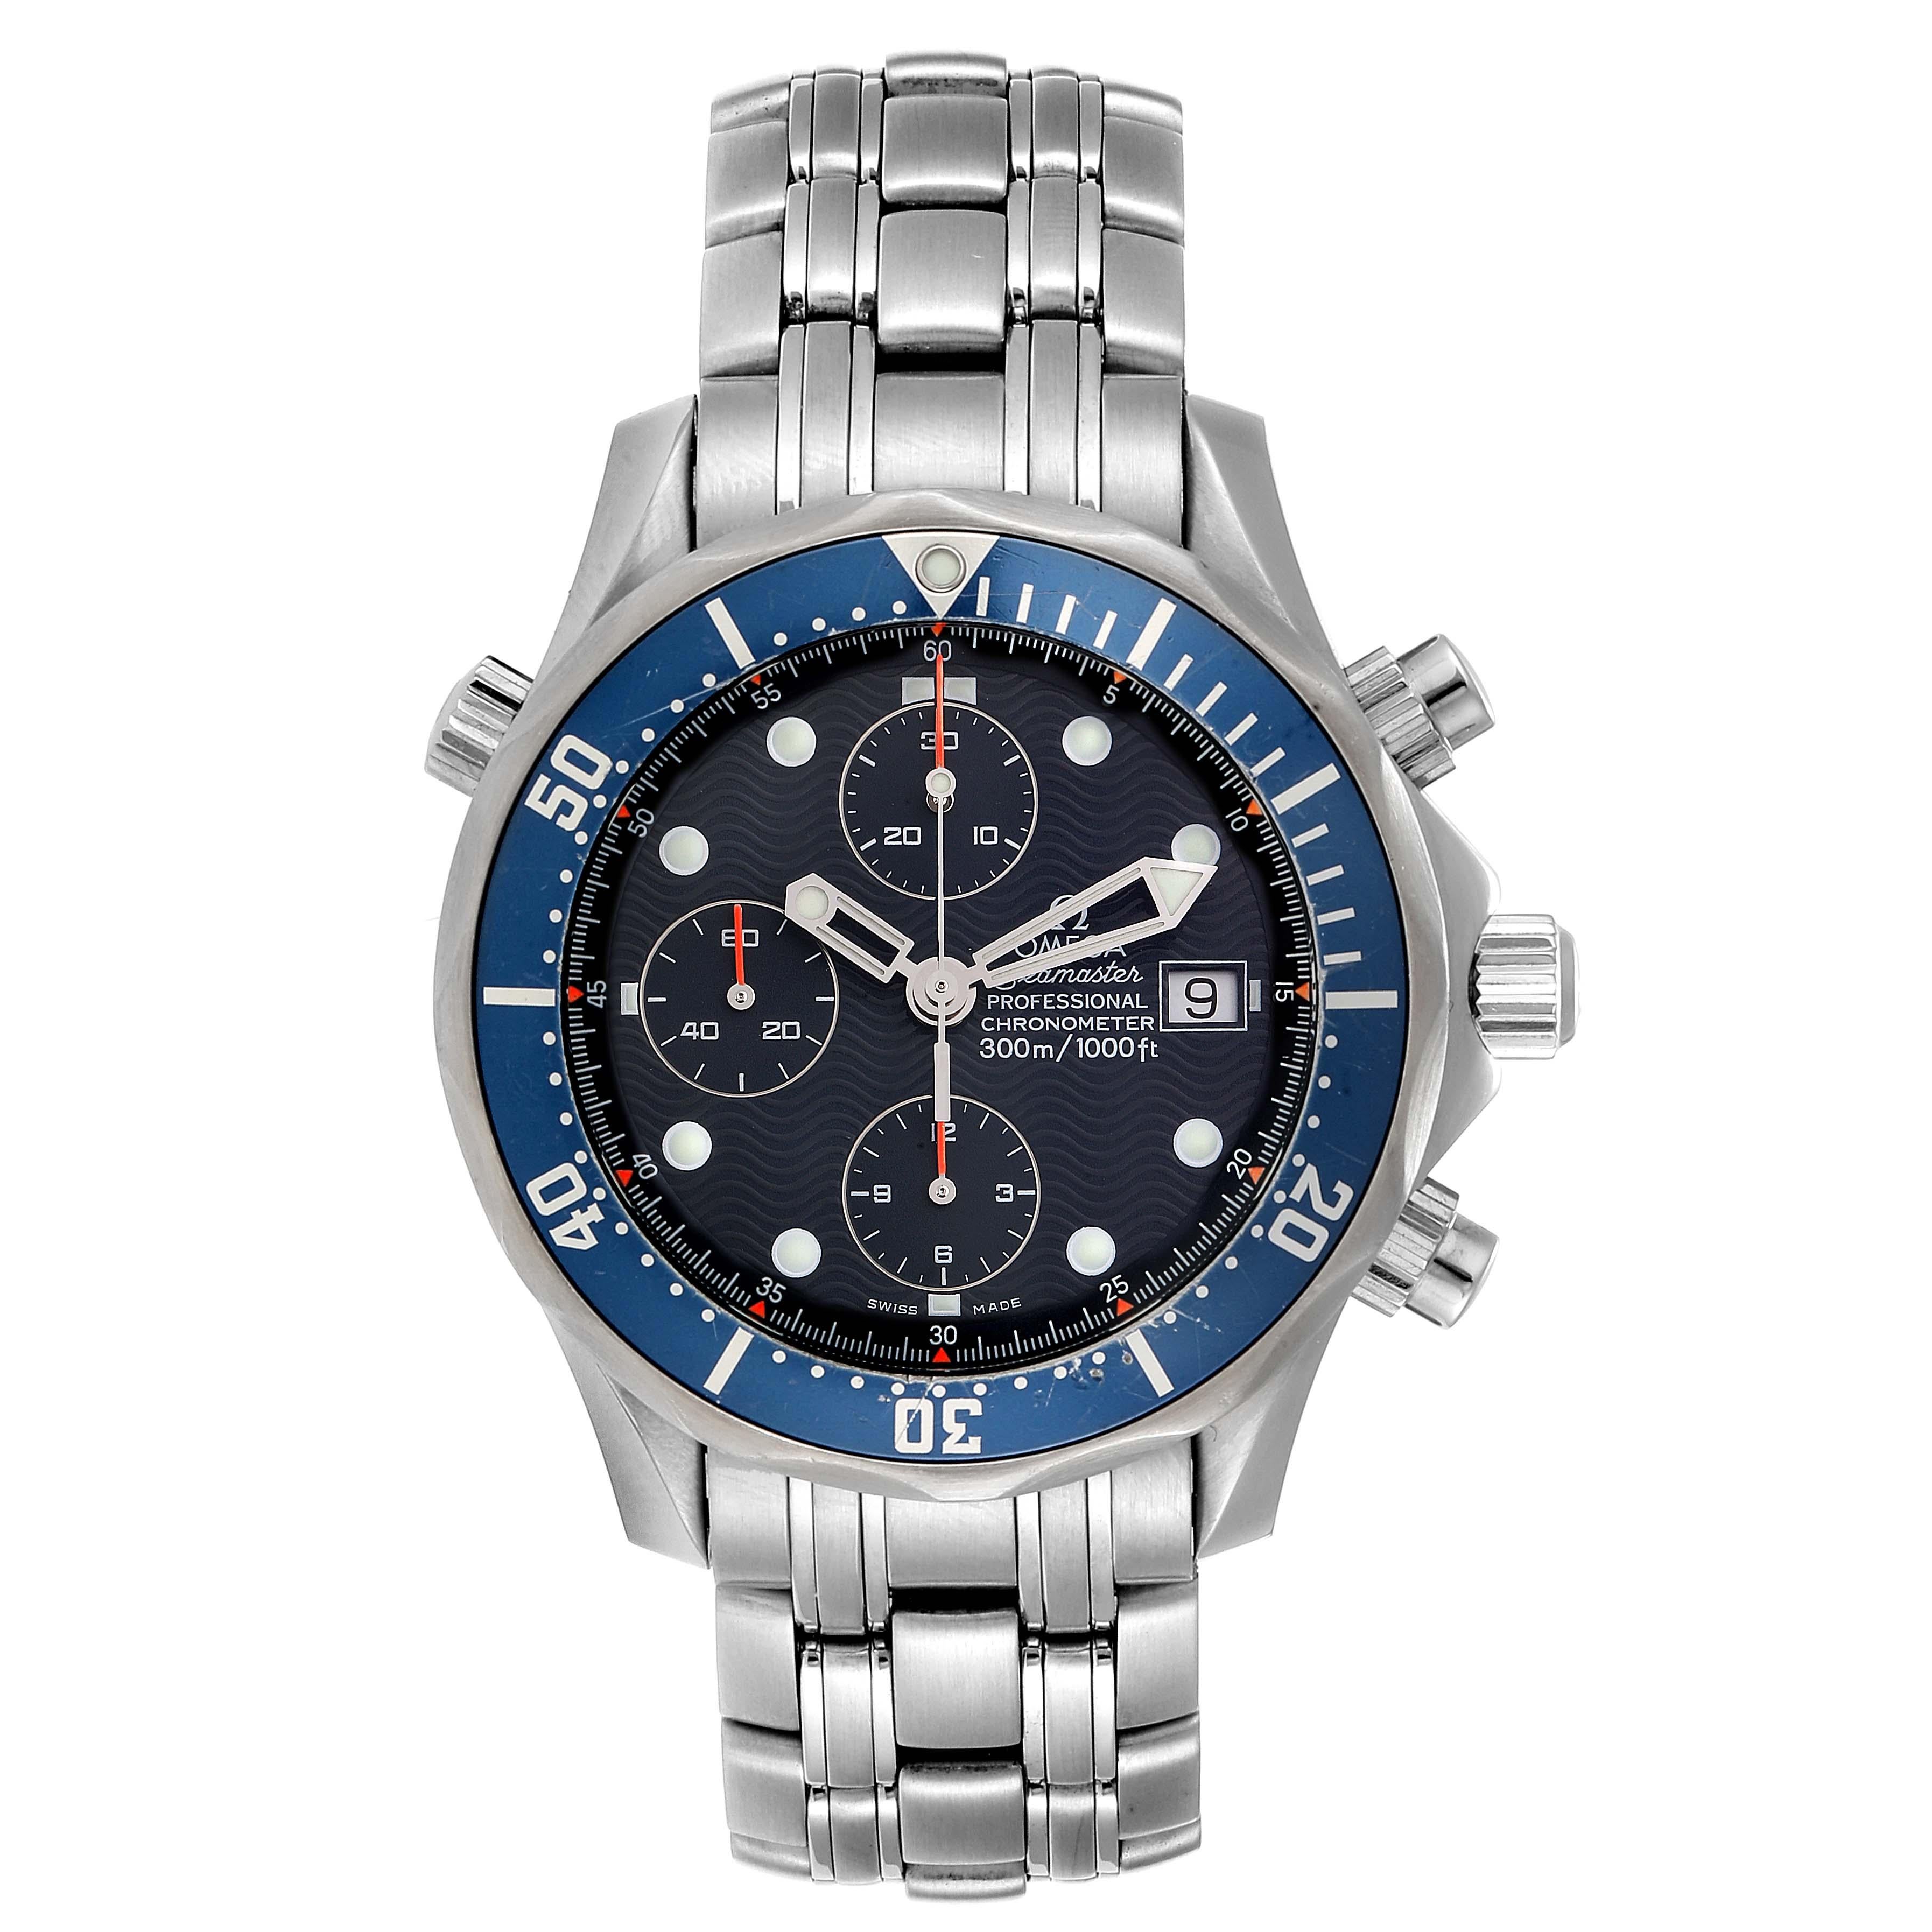 Omega Seamaster Bond Chrono Blue Wave Dial Mens Watch 2599.80.00. Automatic self-winding chronograph movement. Stainless steel round case 41.5 mm in diameter. Blue unidirectional rotating bezel. Scratch resistant sapphire crystal. Blue wave decor